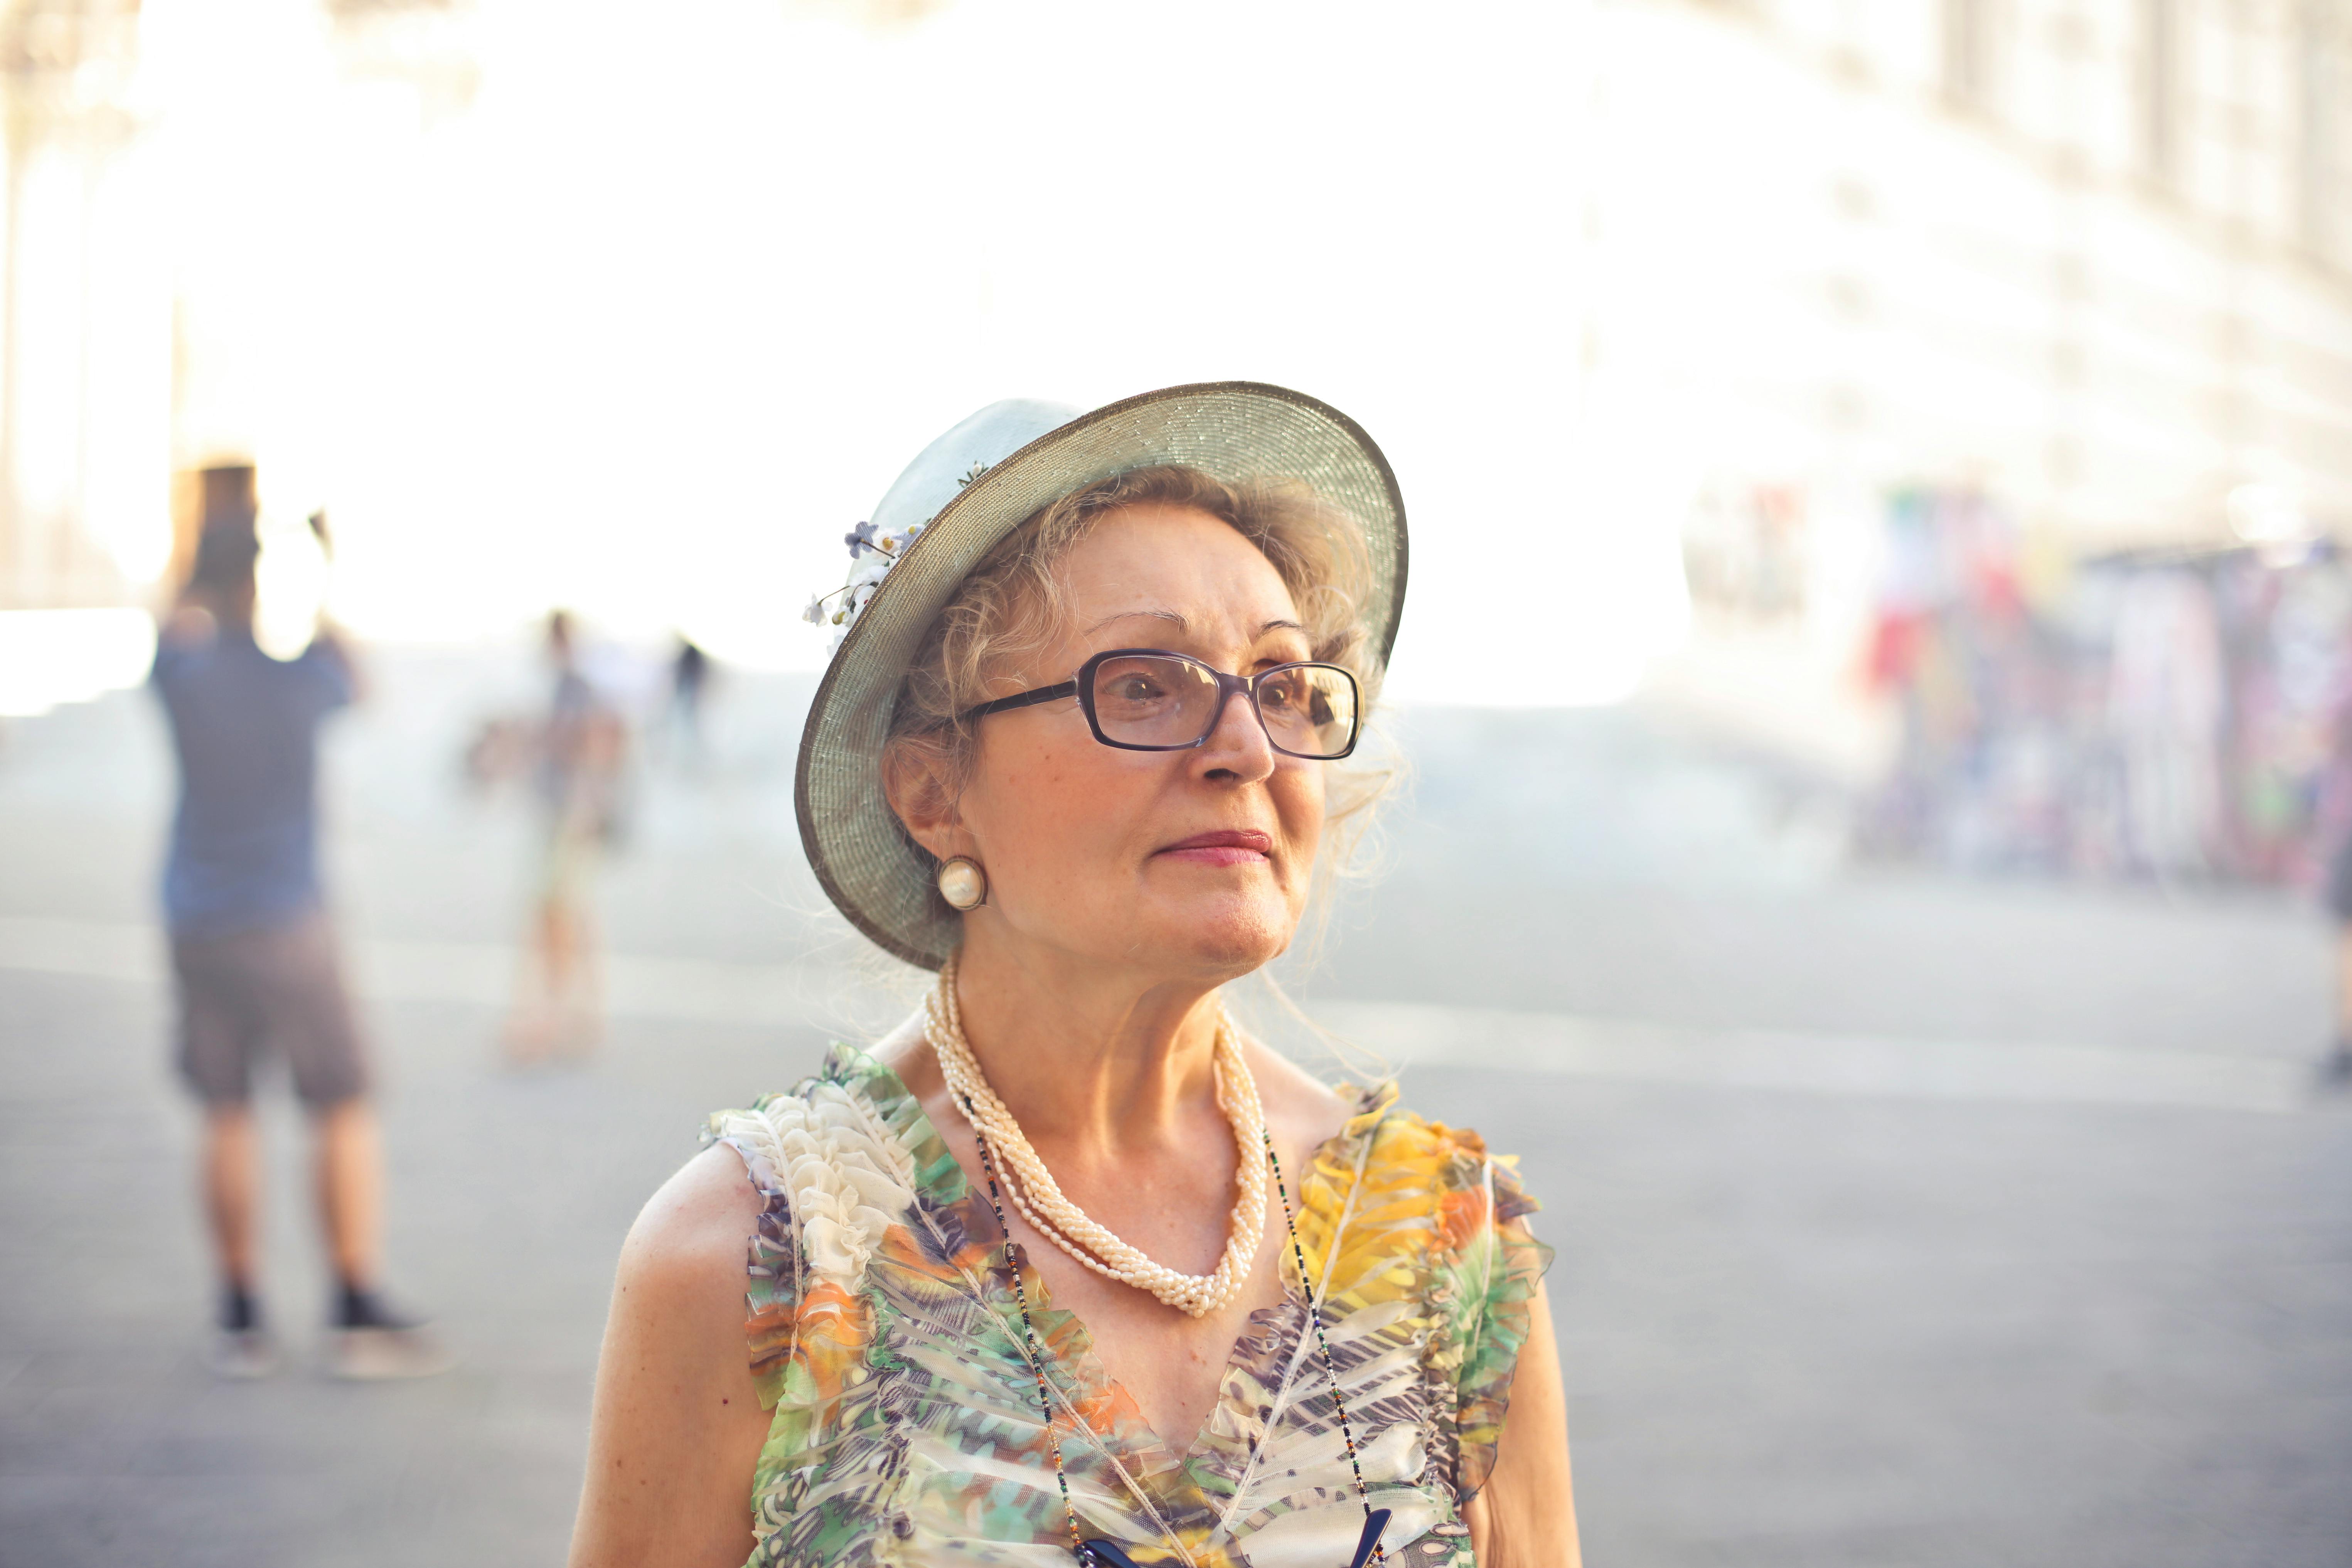 Woman in pastel color sleeveless shirt and sunhat. | Photo: Pexels